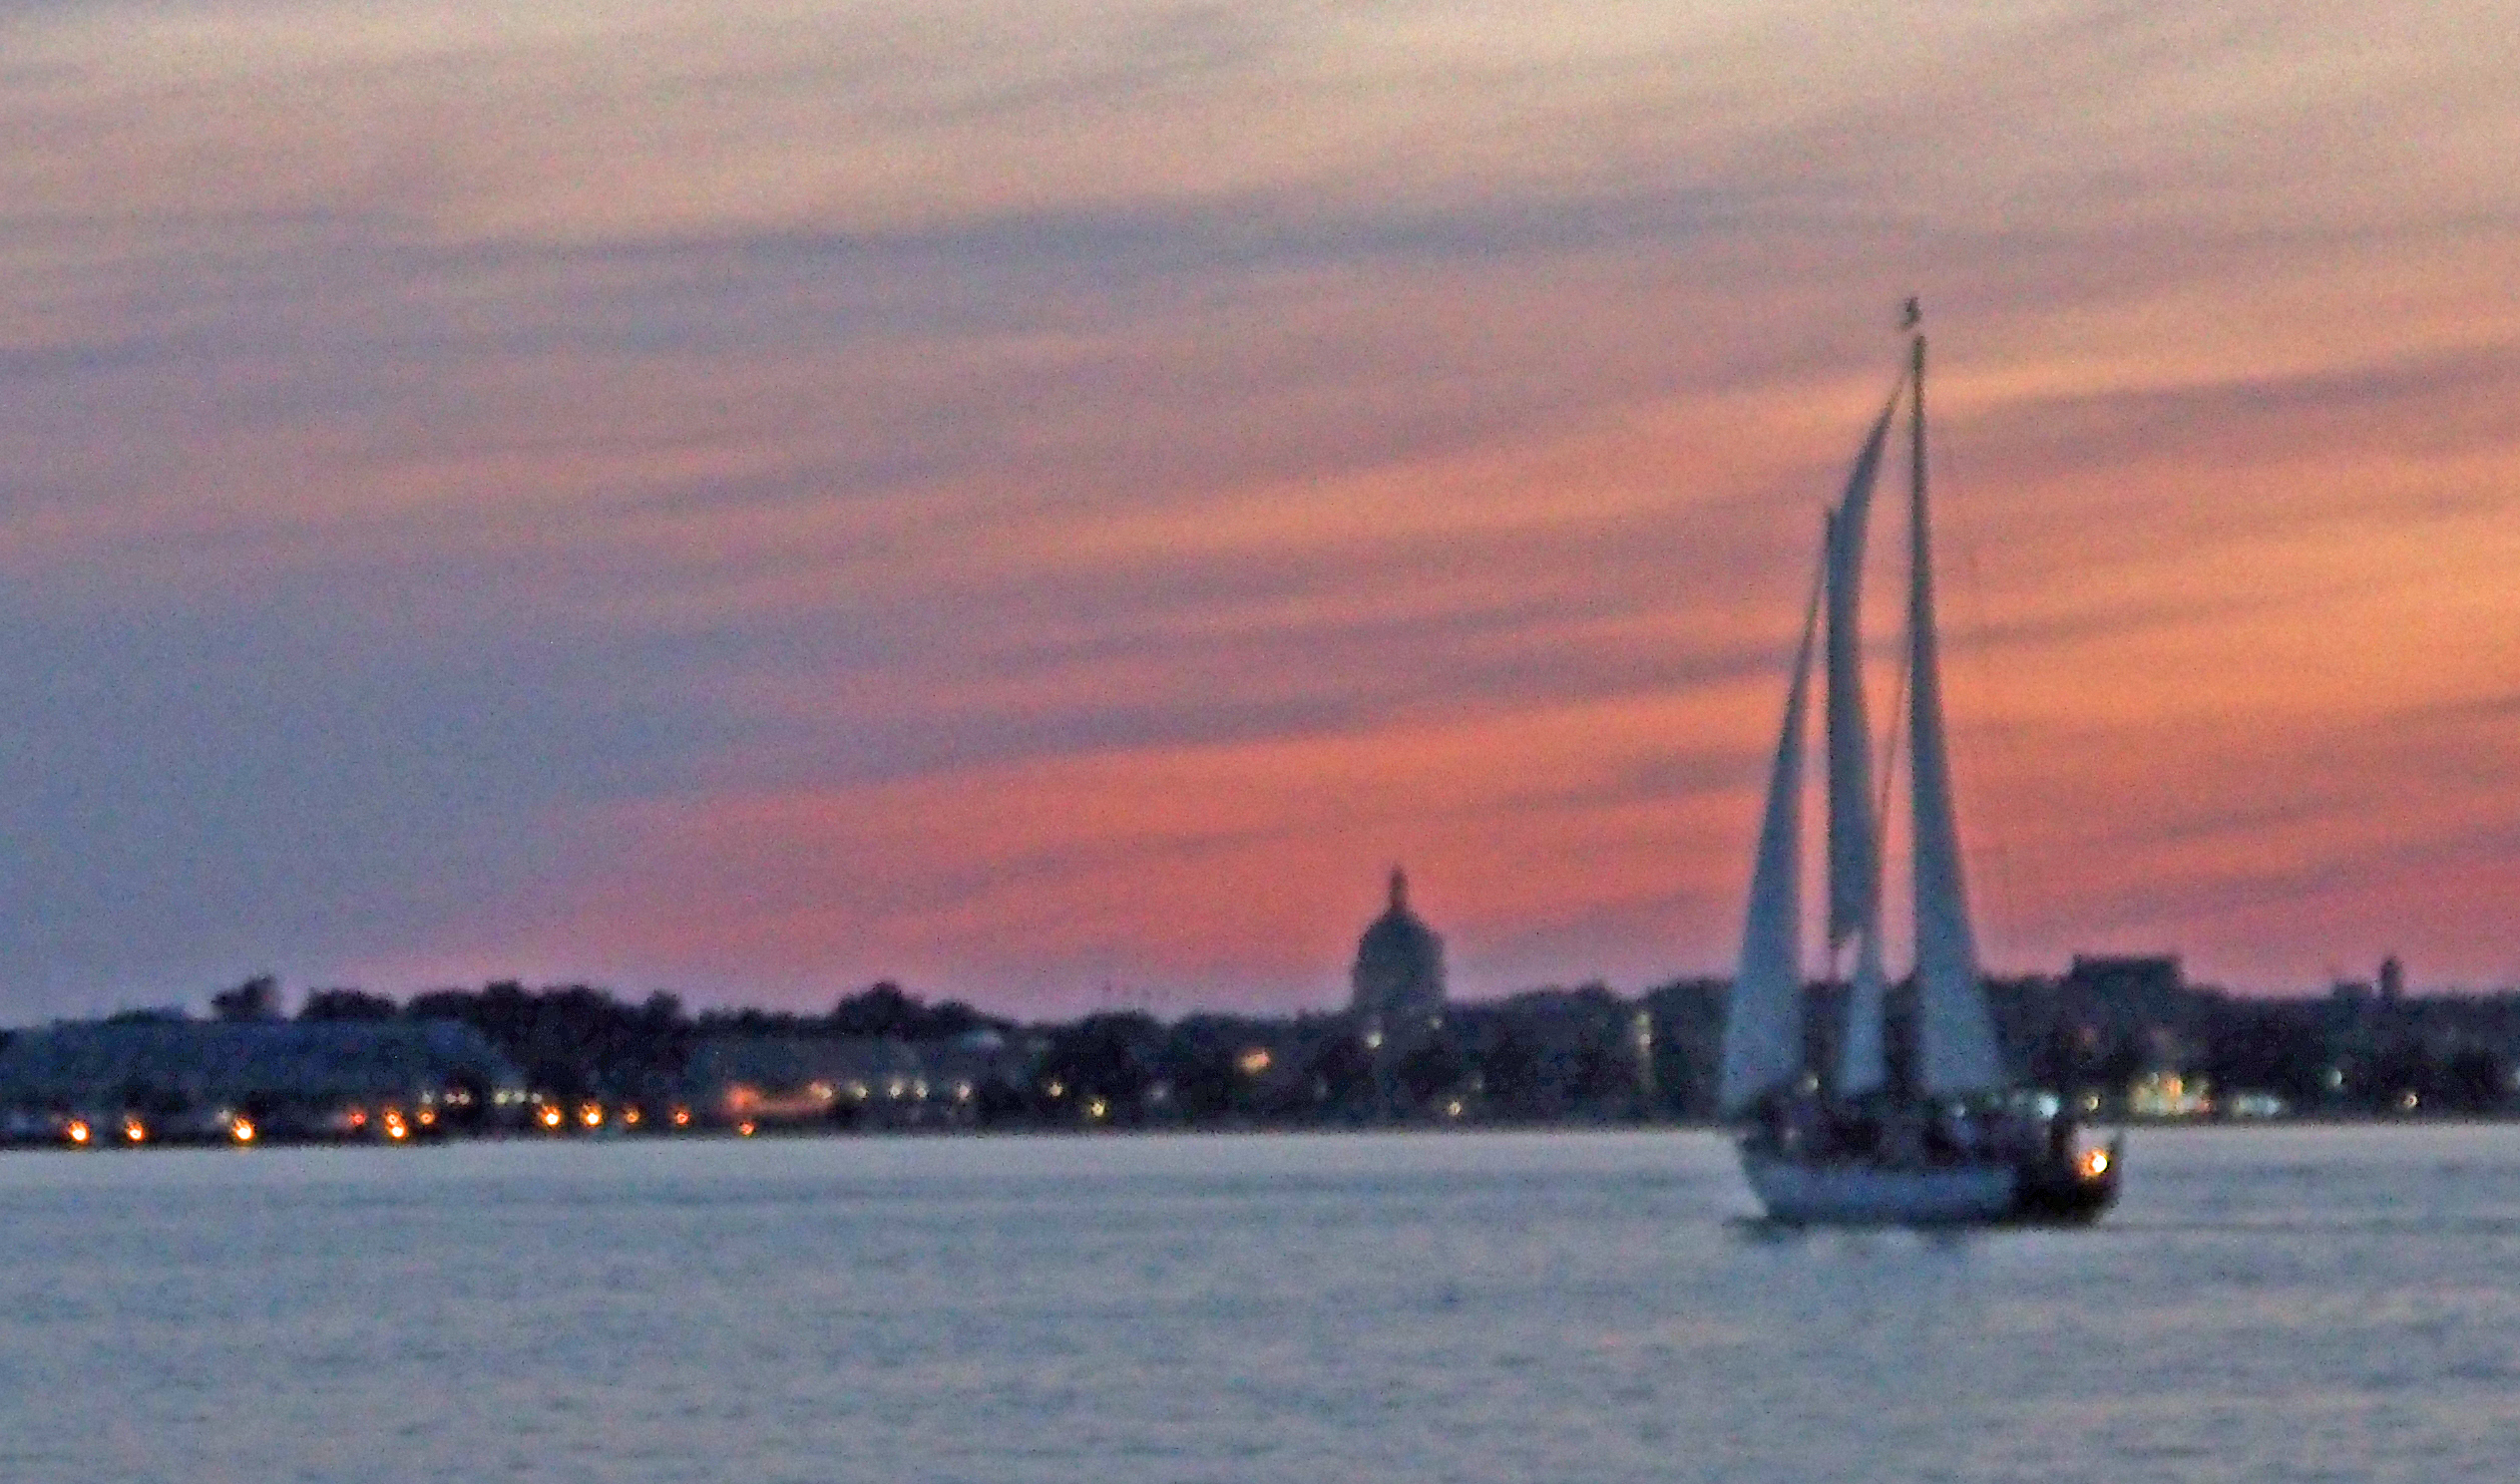 USNA in silhouette against a pinked streaked sky with sailboat on water